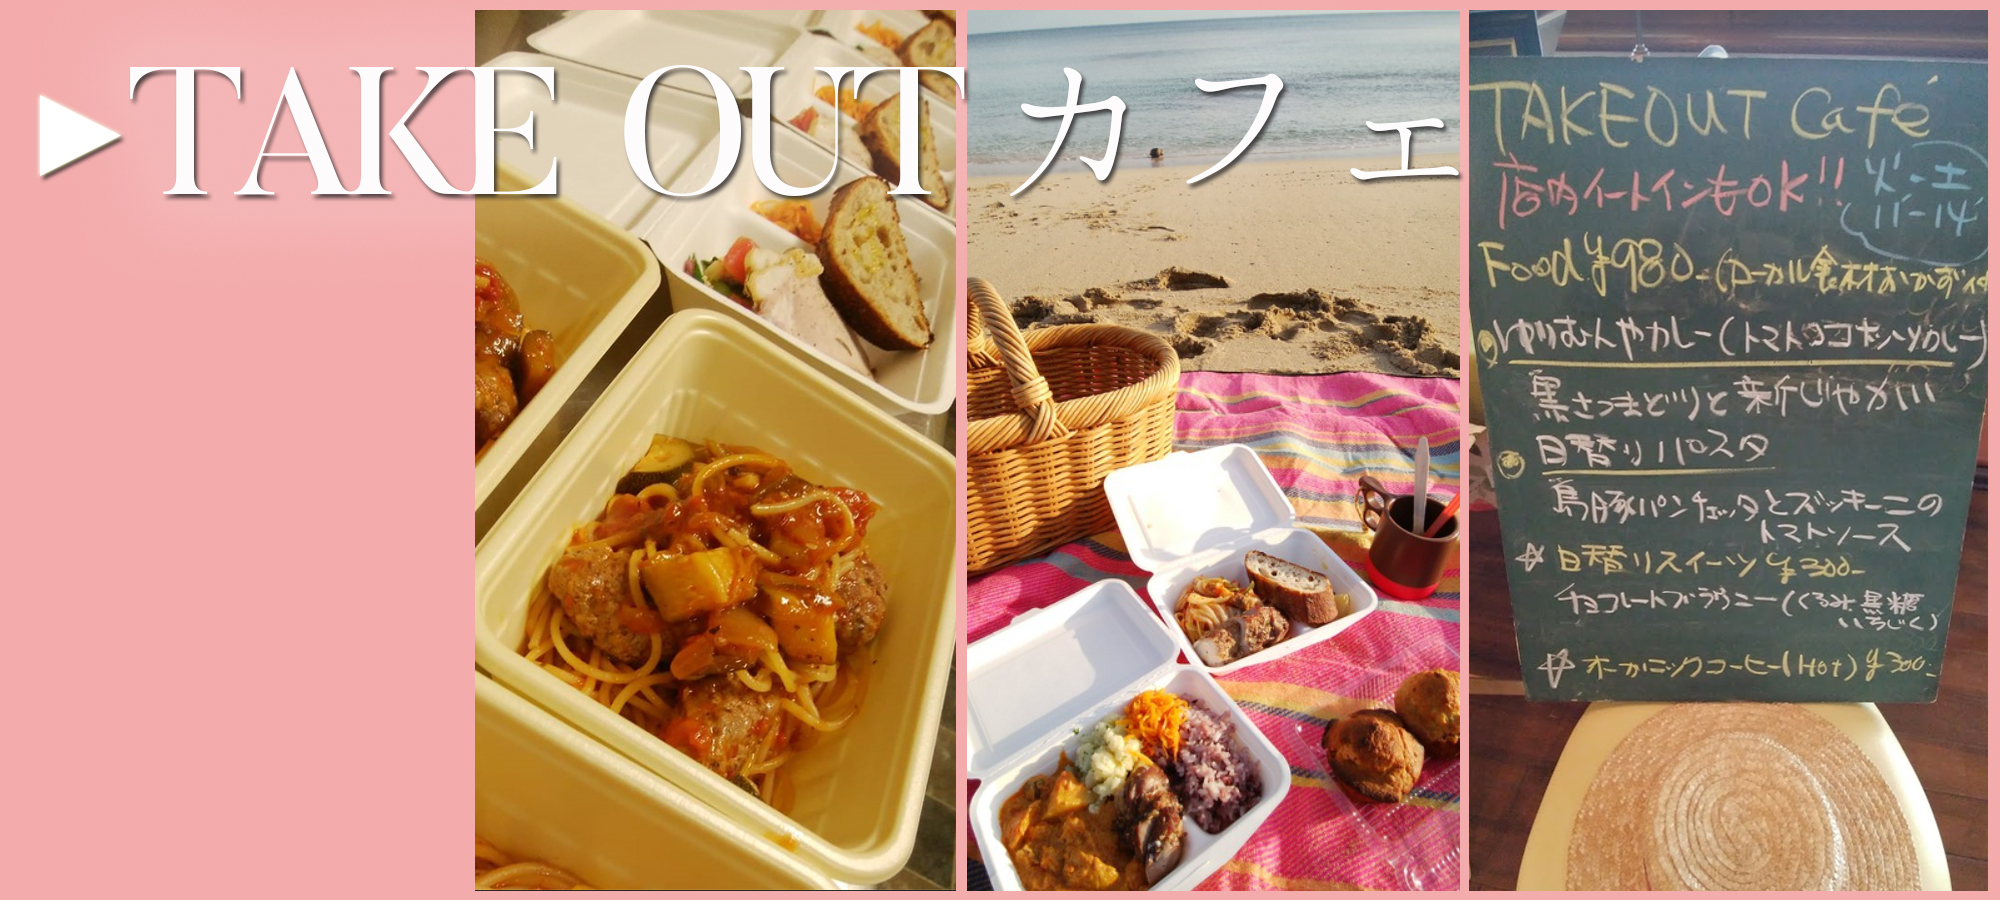 take out カフェ